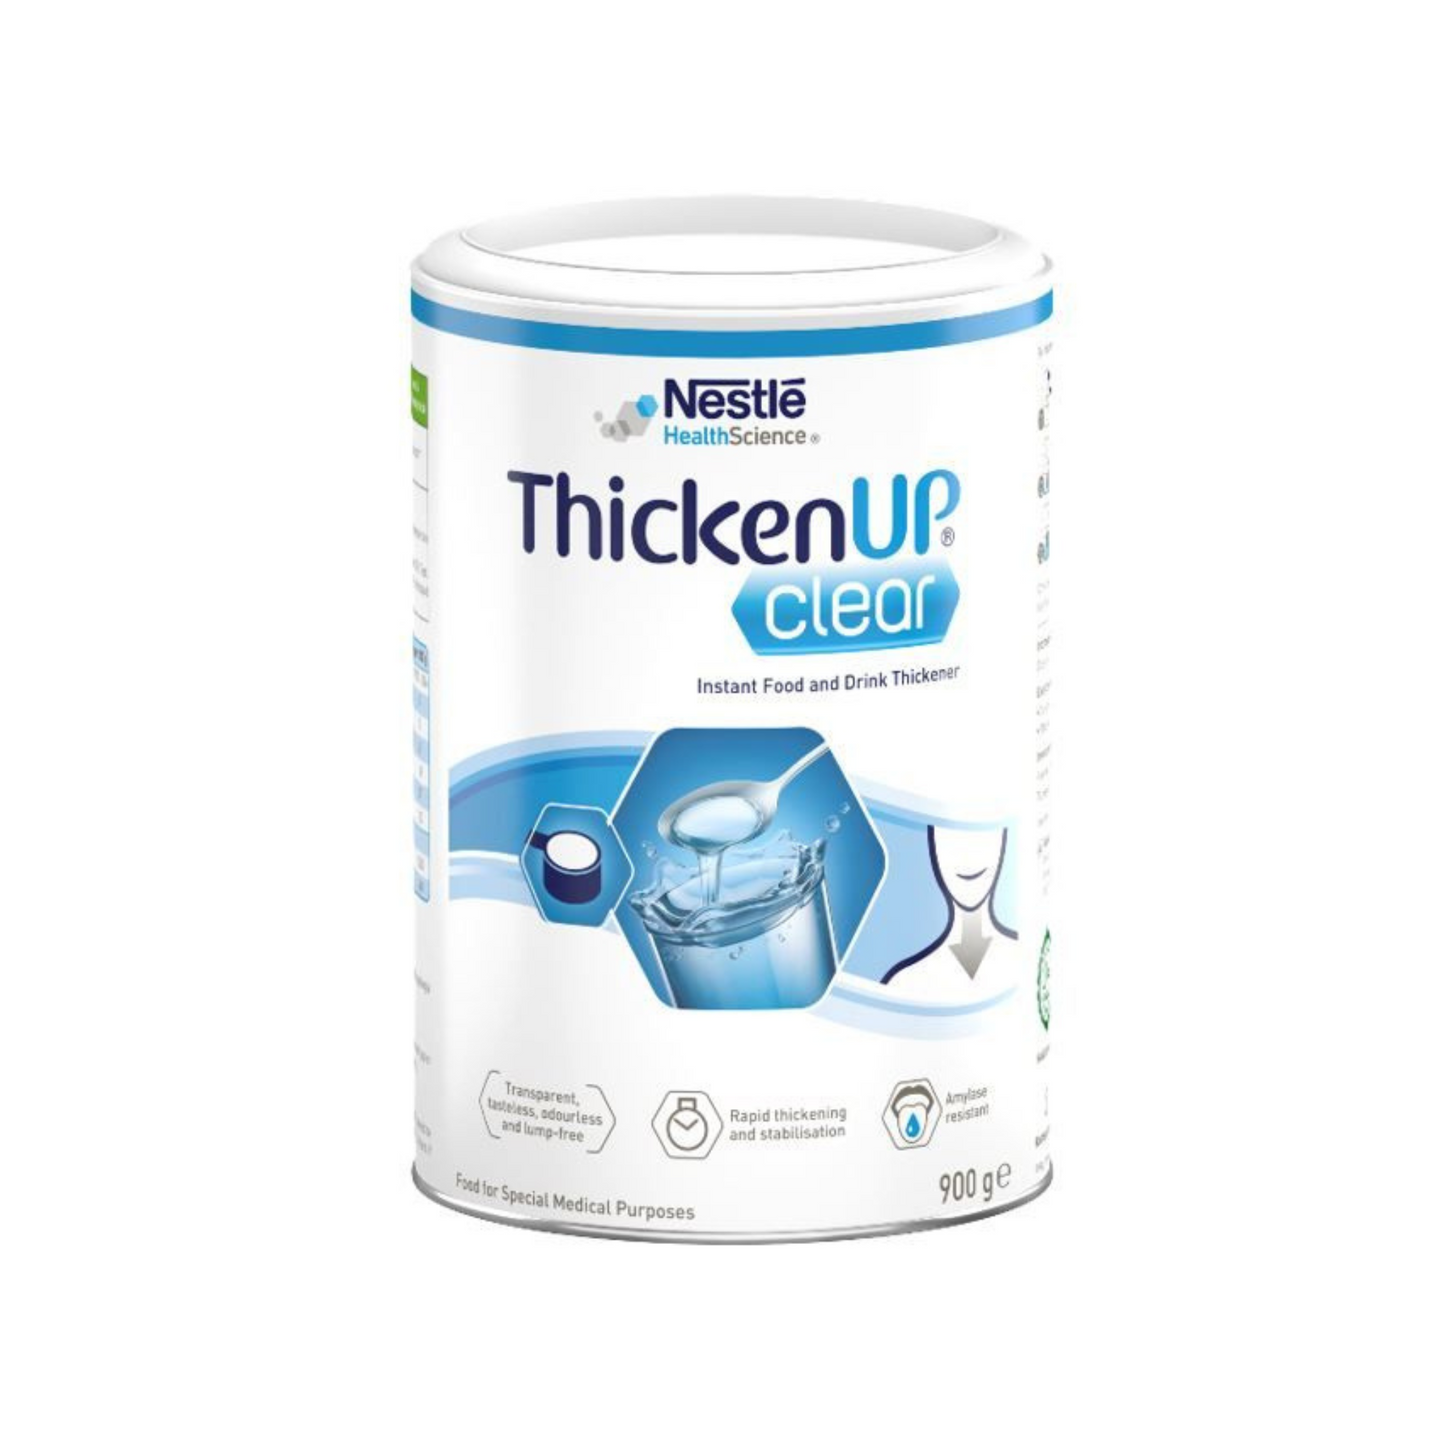 Thicken Up clear